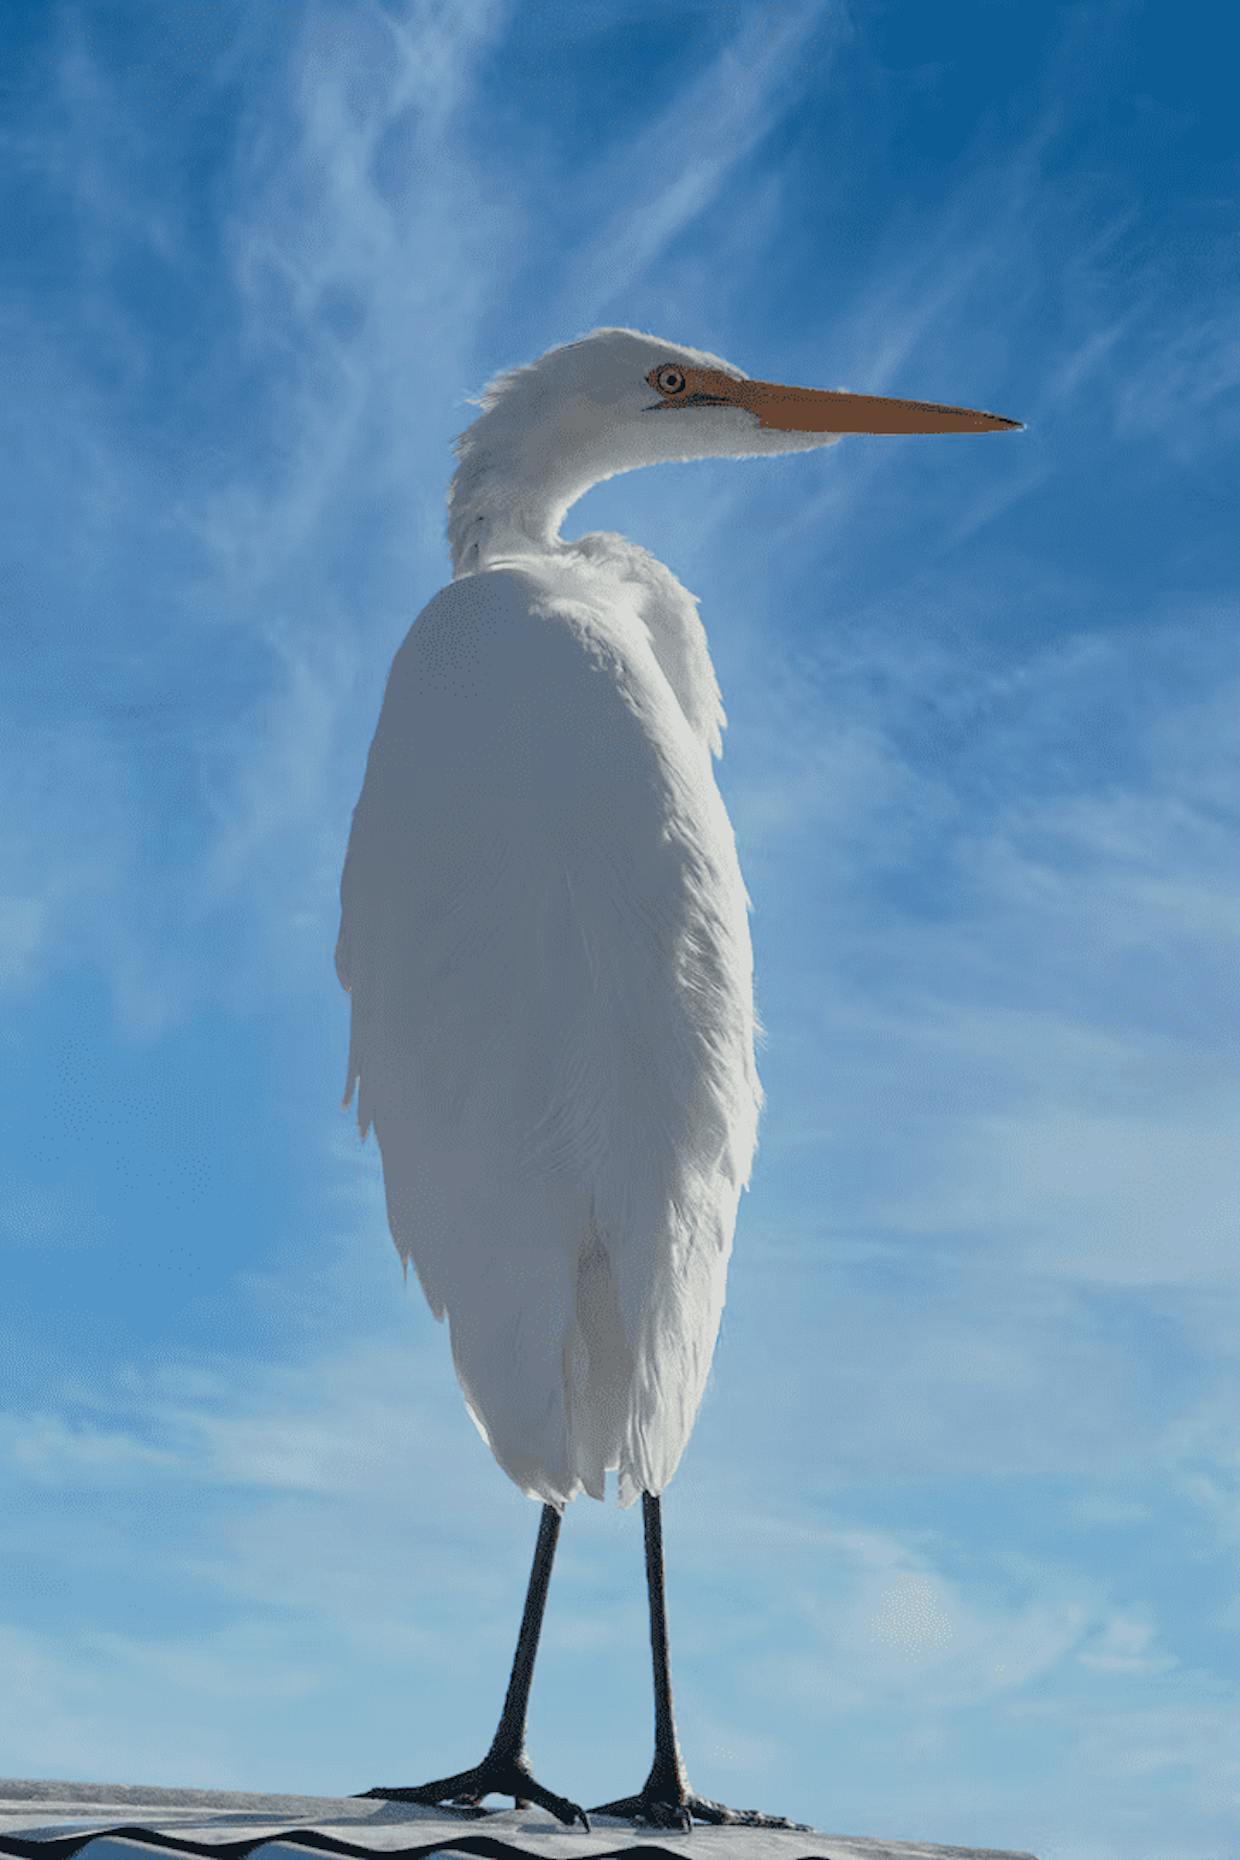 An Egret assesses the situation at Canoa Lake. (Steve Carr)